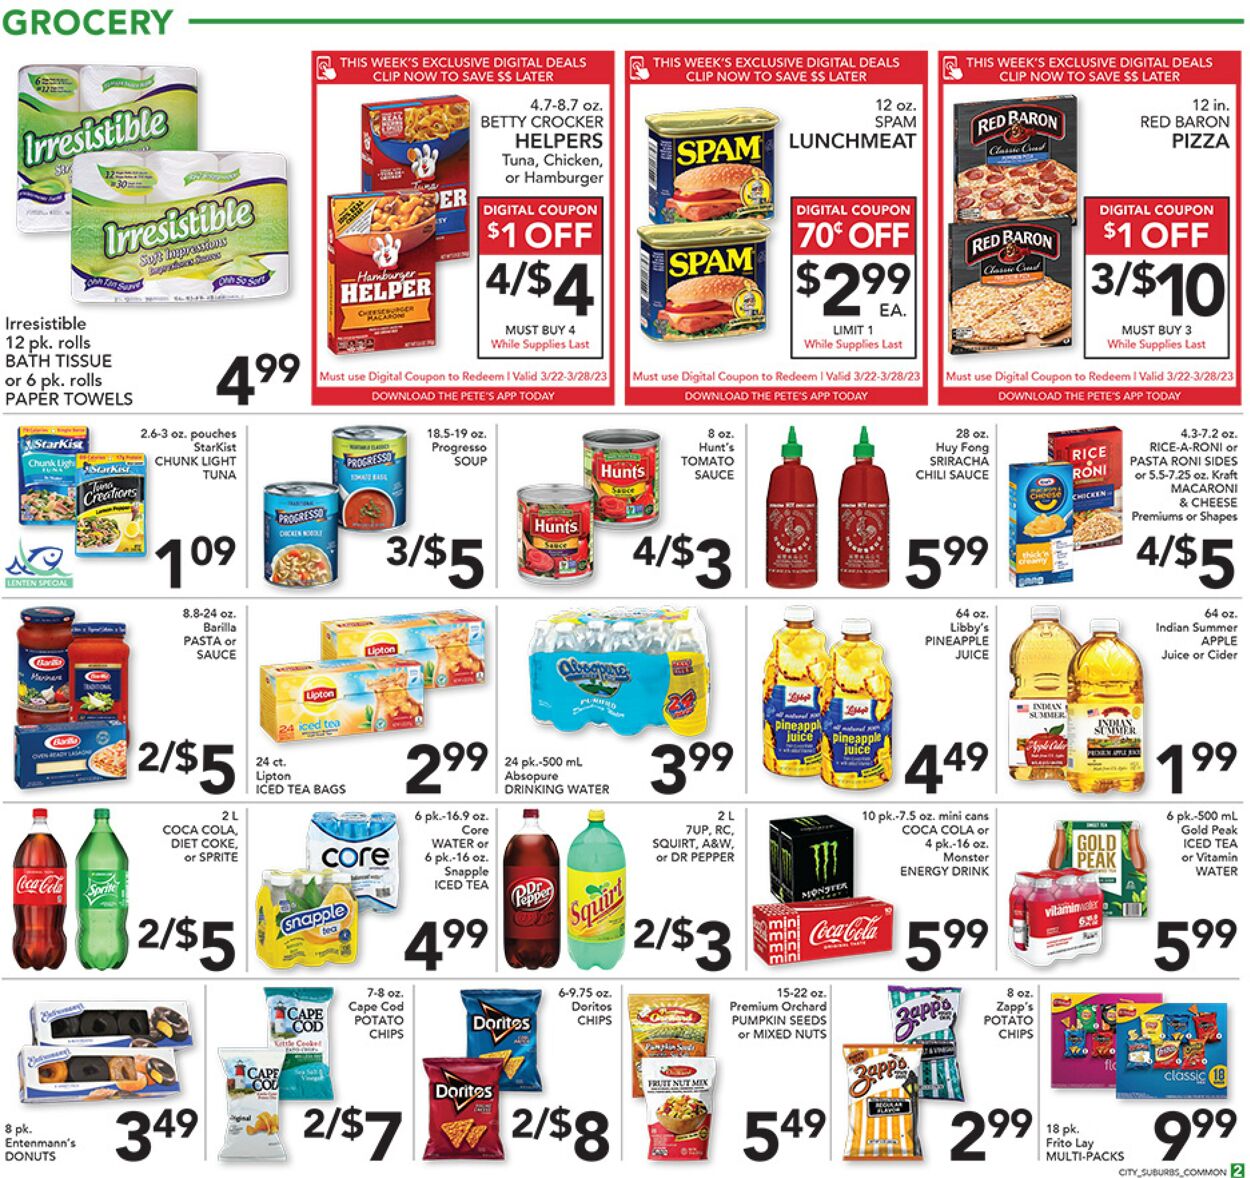 Weekly ad Pete's Fresh Market 03/22/2023 - 03/28/2023